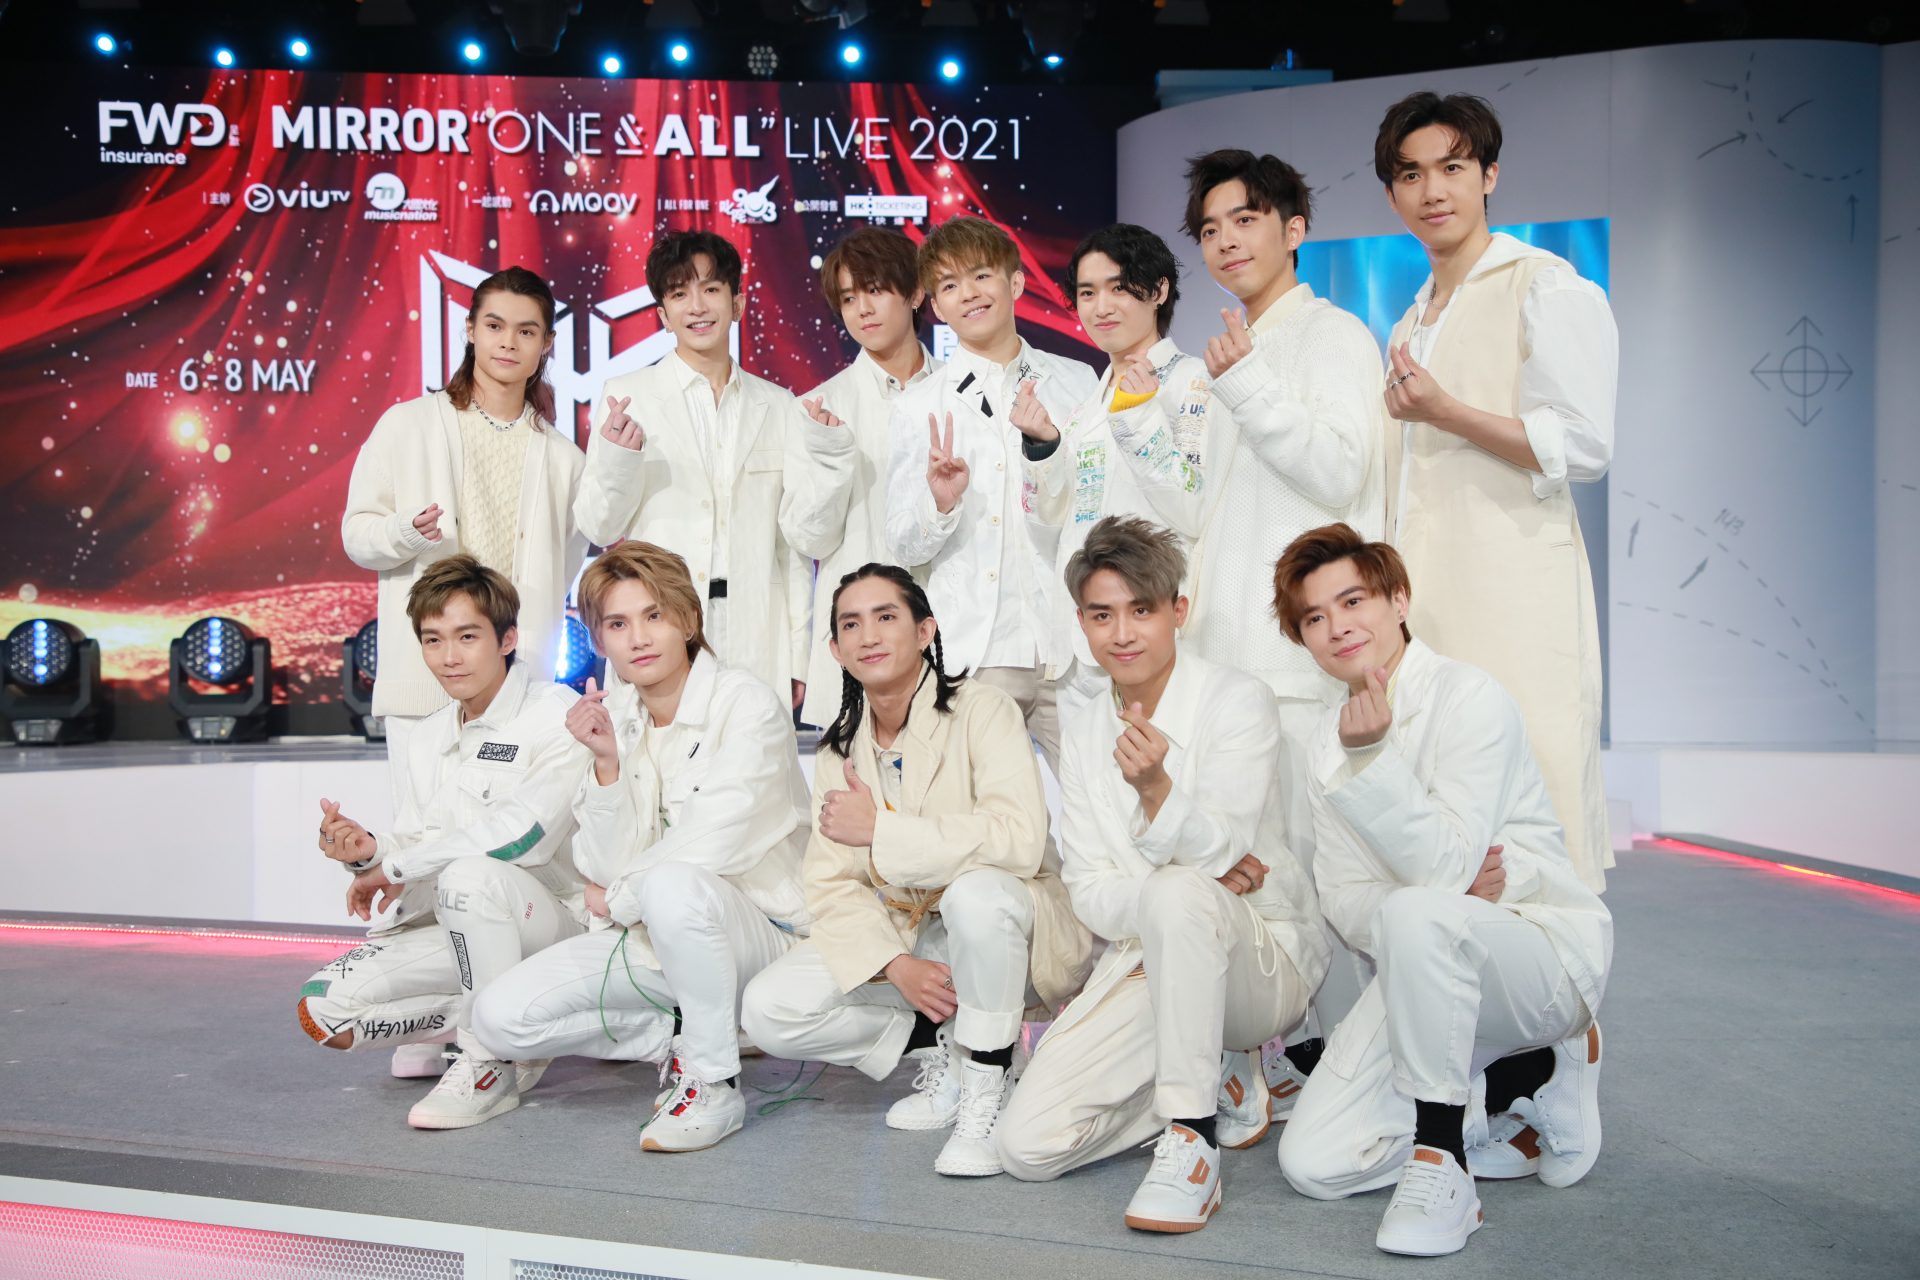 <p>Before Mirror came to be, the boyband all met during their individual stints in the canto TV show 'Good Night Show - King Maker,' where 99 male contestants compete against each other for the title of rising ‘King’ in the canto entertainment scene.</p>